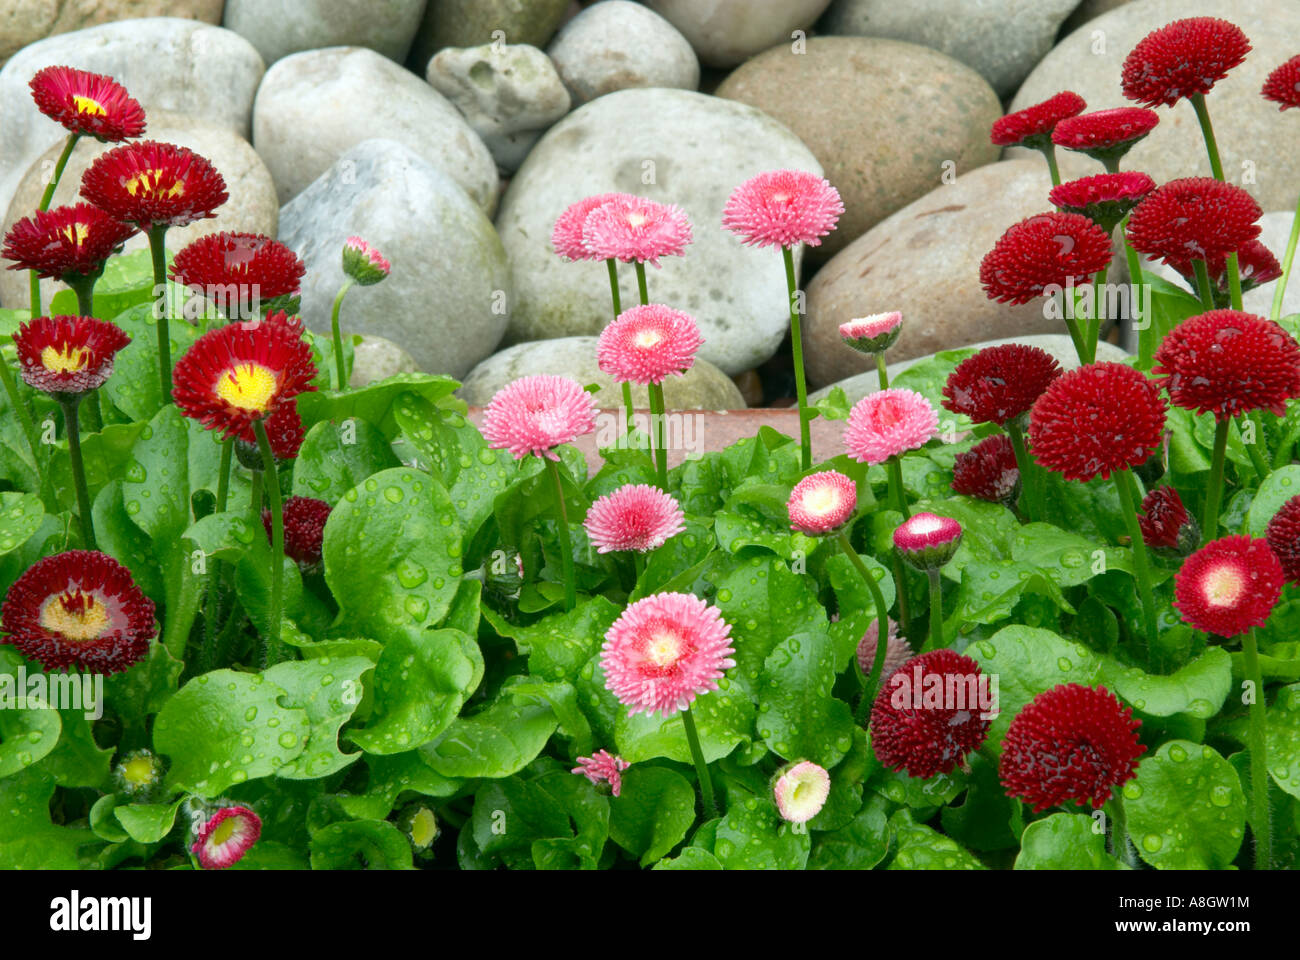 Red and pink daisies covered with raindrops planted beside large pebbles Stock Photo